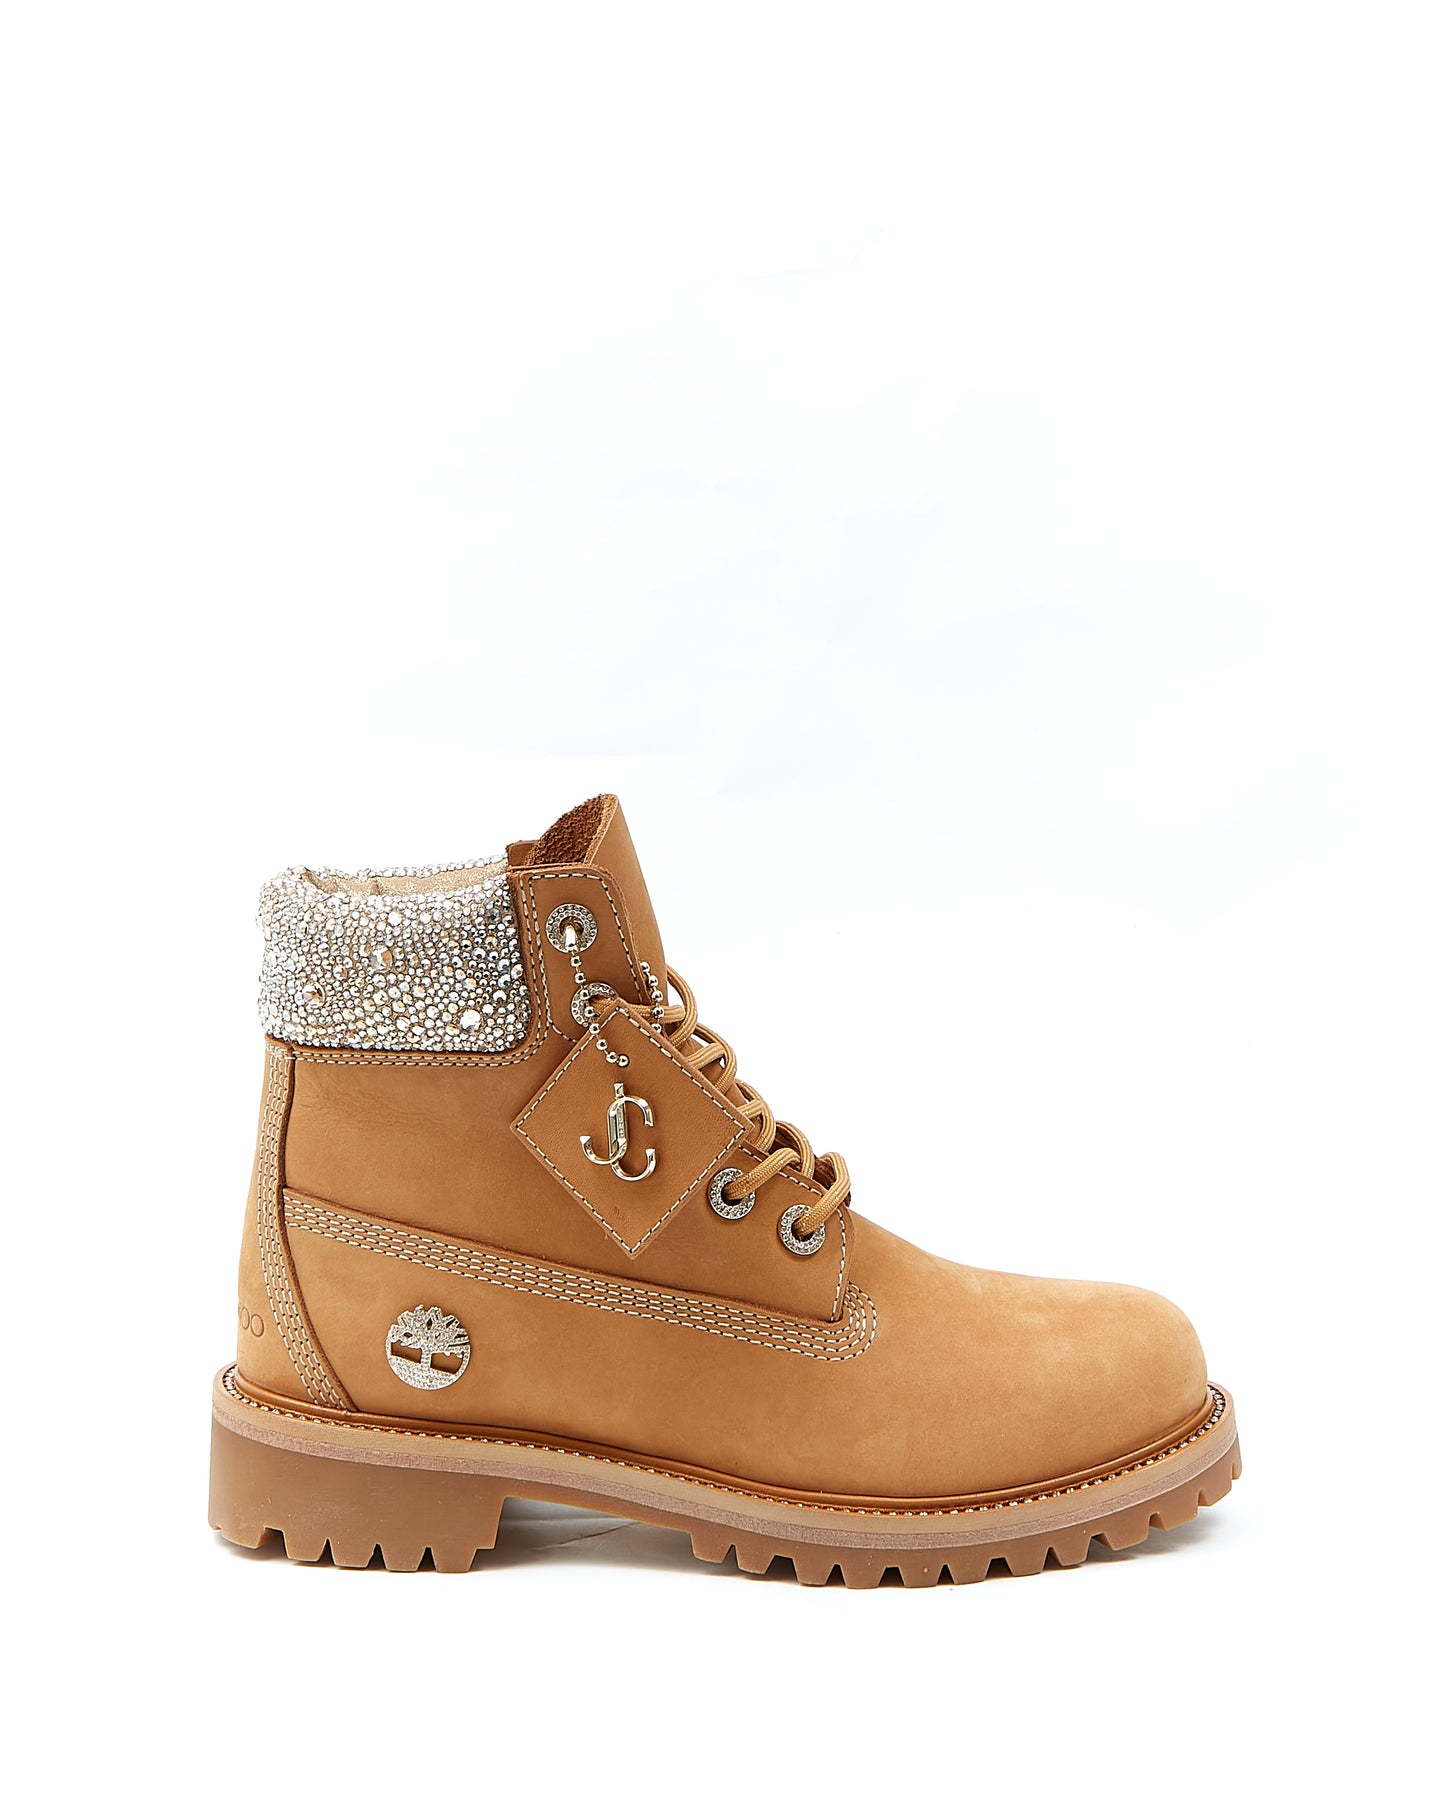 Jimmy Choo x Timberland Suede Crystal Embellished Combat Boots - 37.5